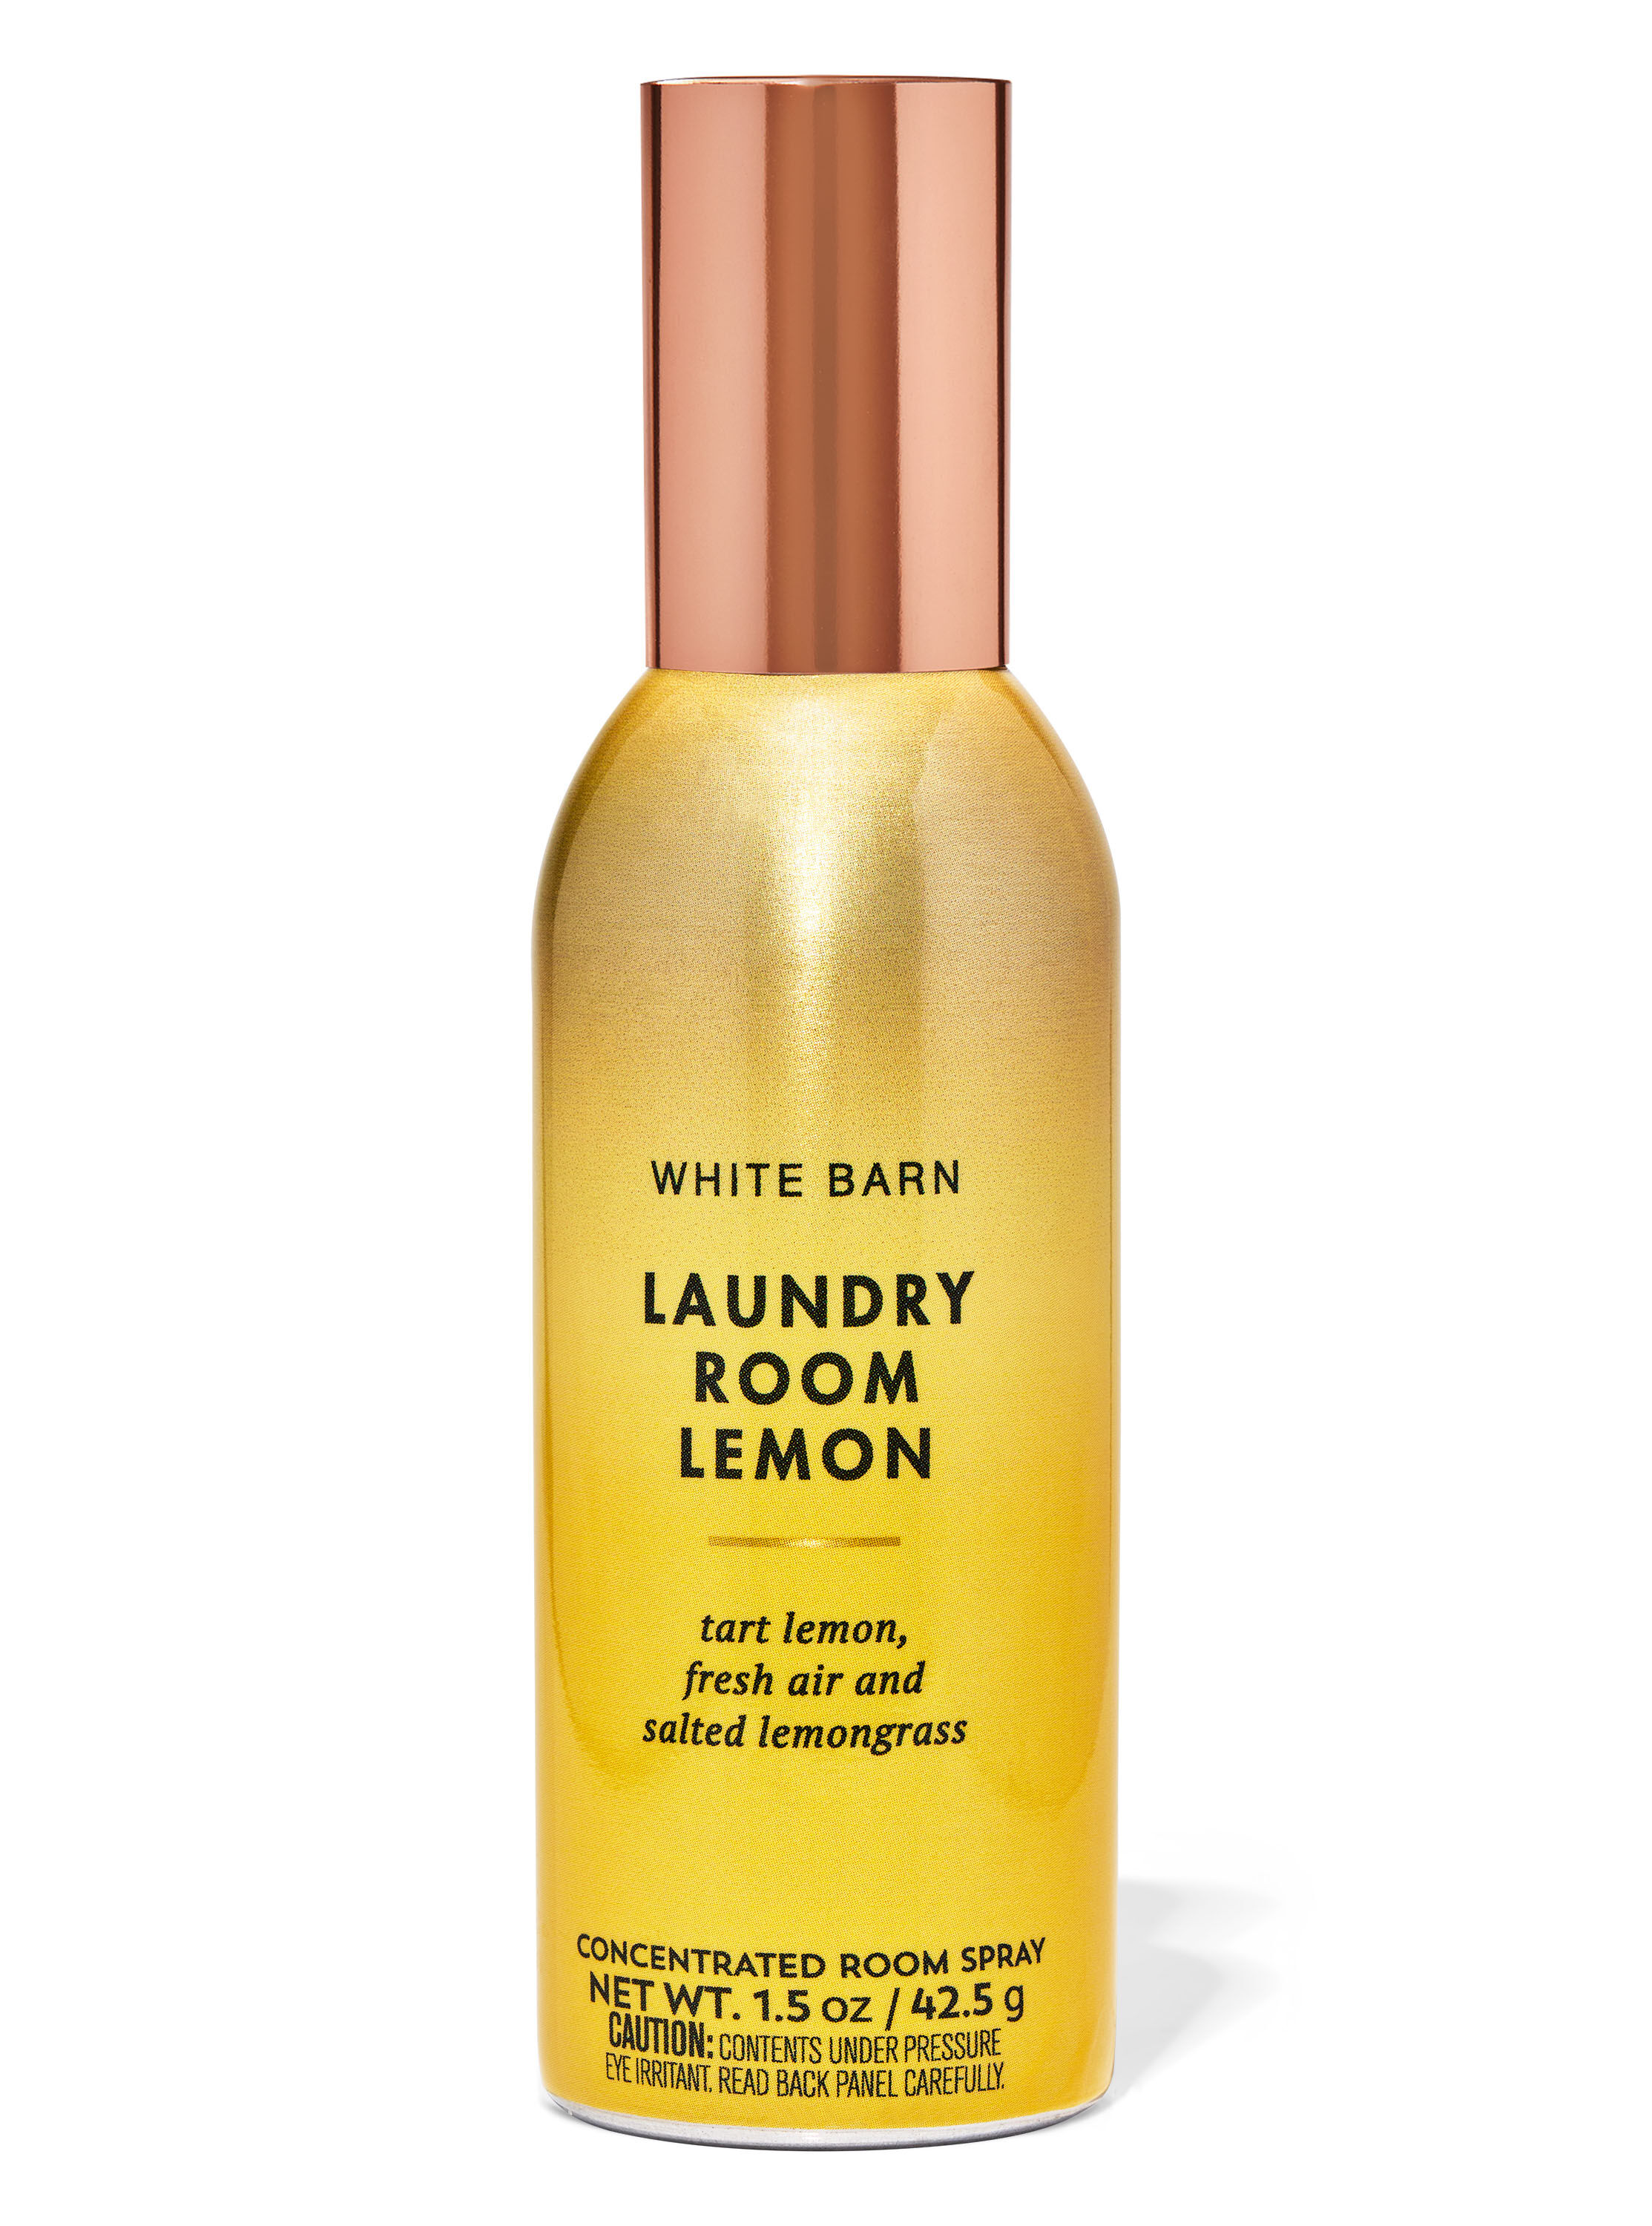 Laundry Room Lemon Concentrated Room Spray